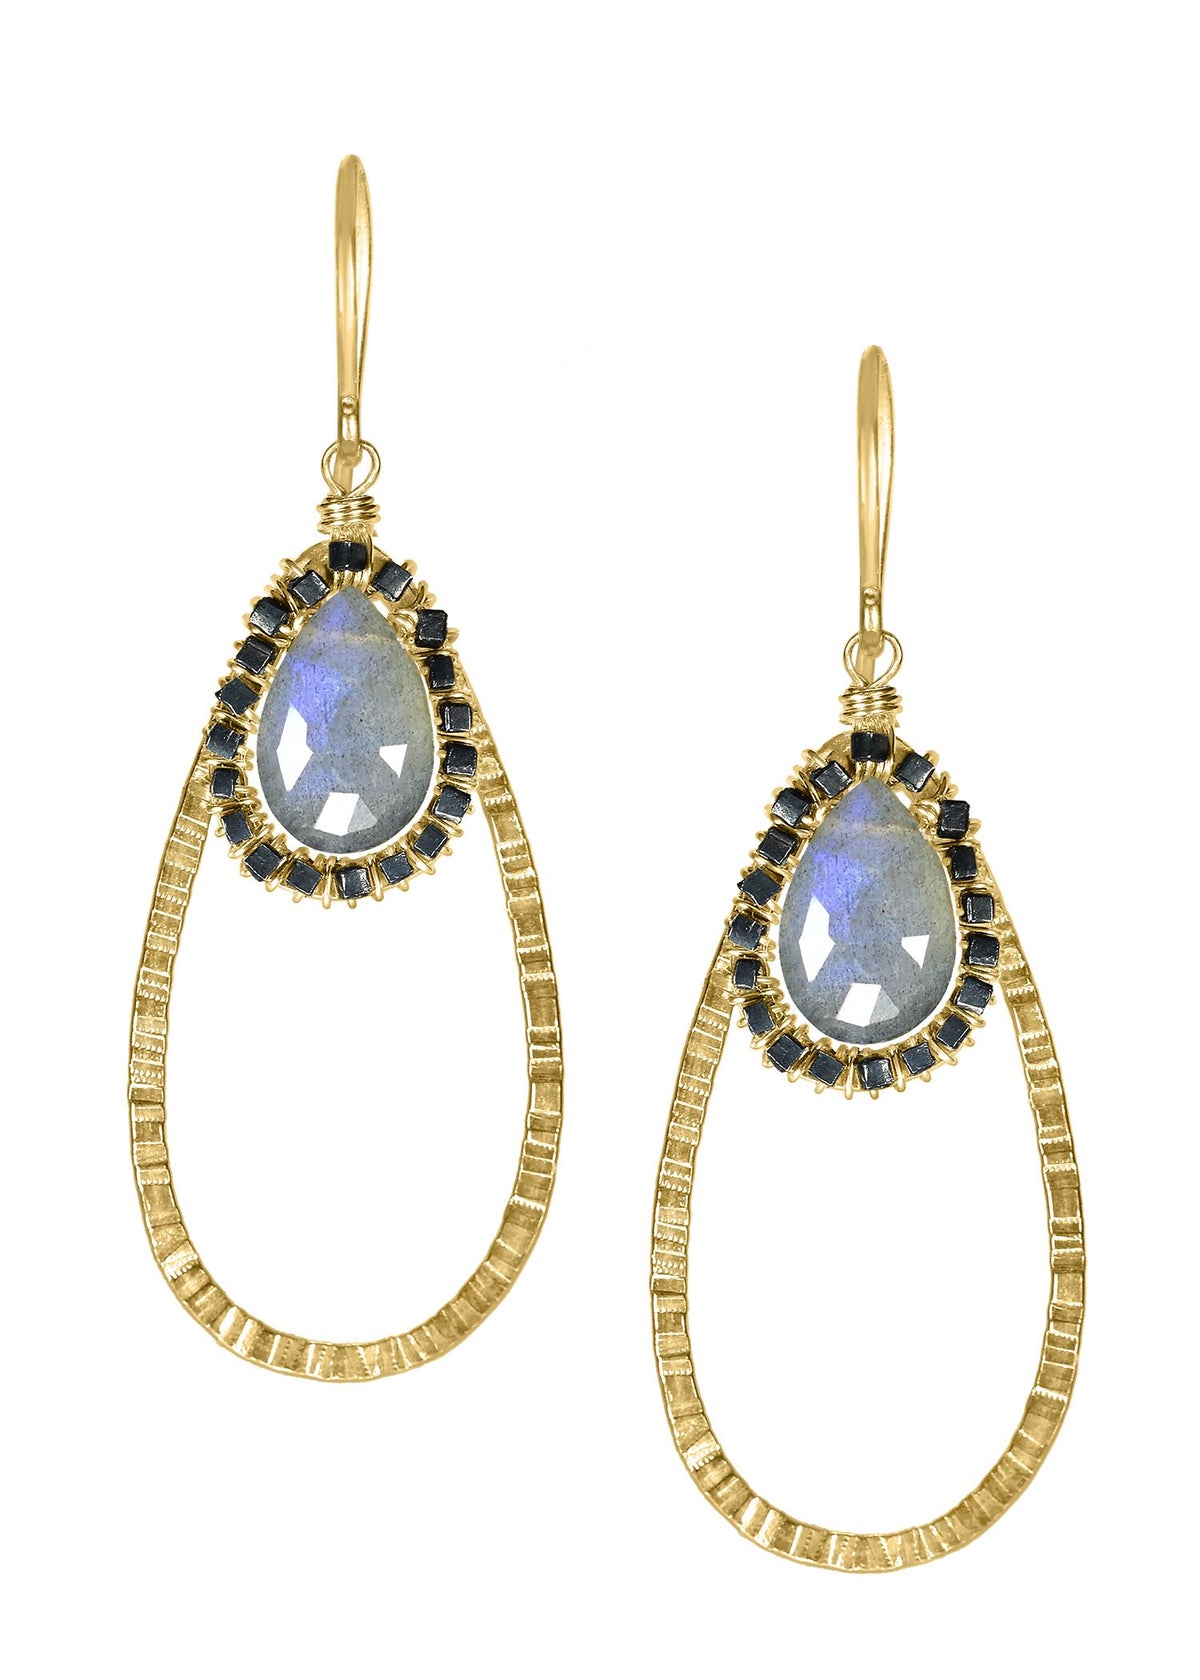 Labradorite 14k gold fill Blackened sterling silver Mixed metal Earrings measure 1-3/4&quot; in length (including ear wires) and 1/2&quot; in width Handmade in our Los Angeles studio